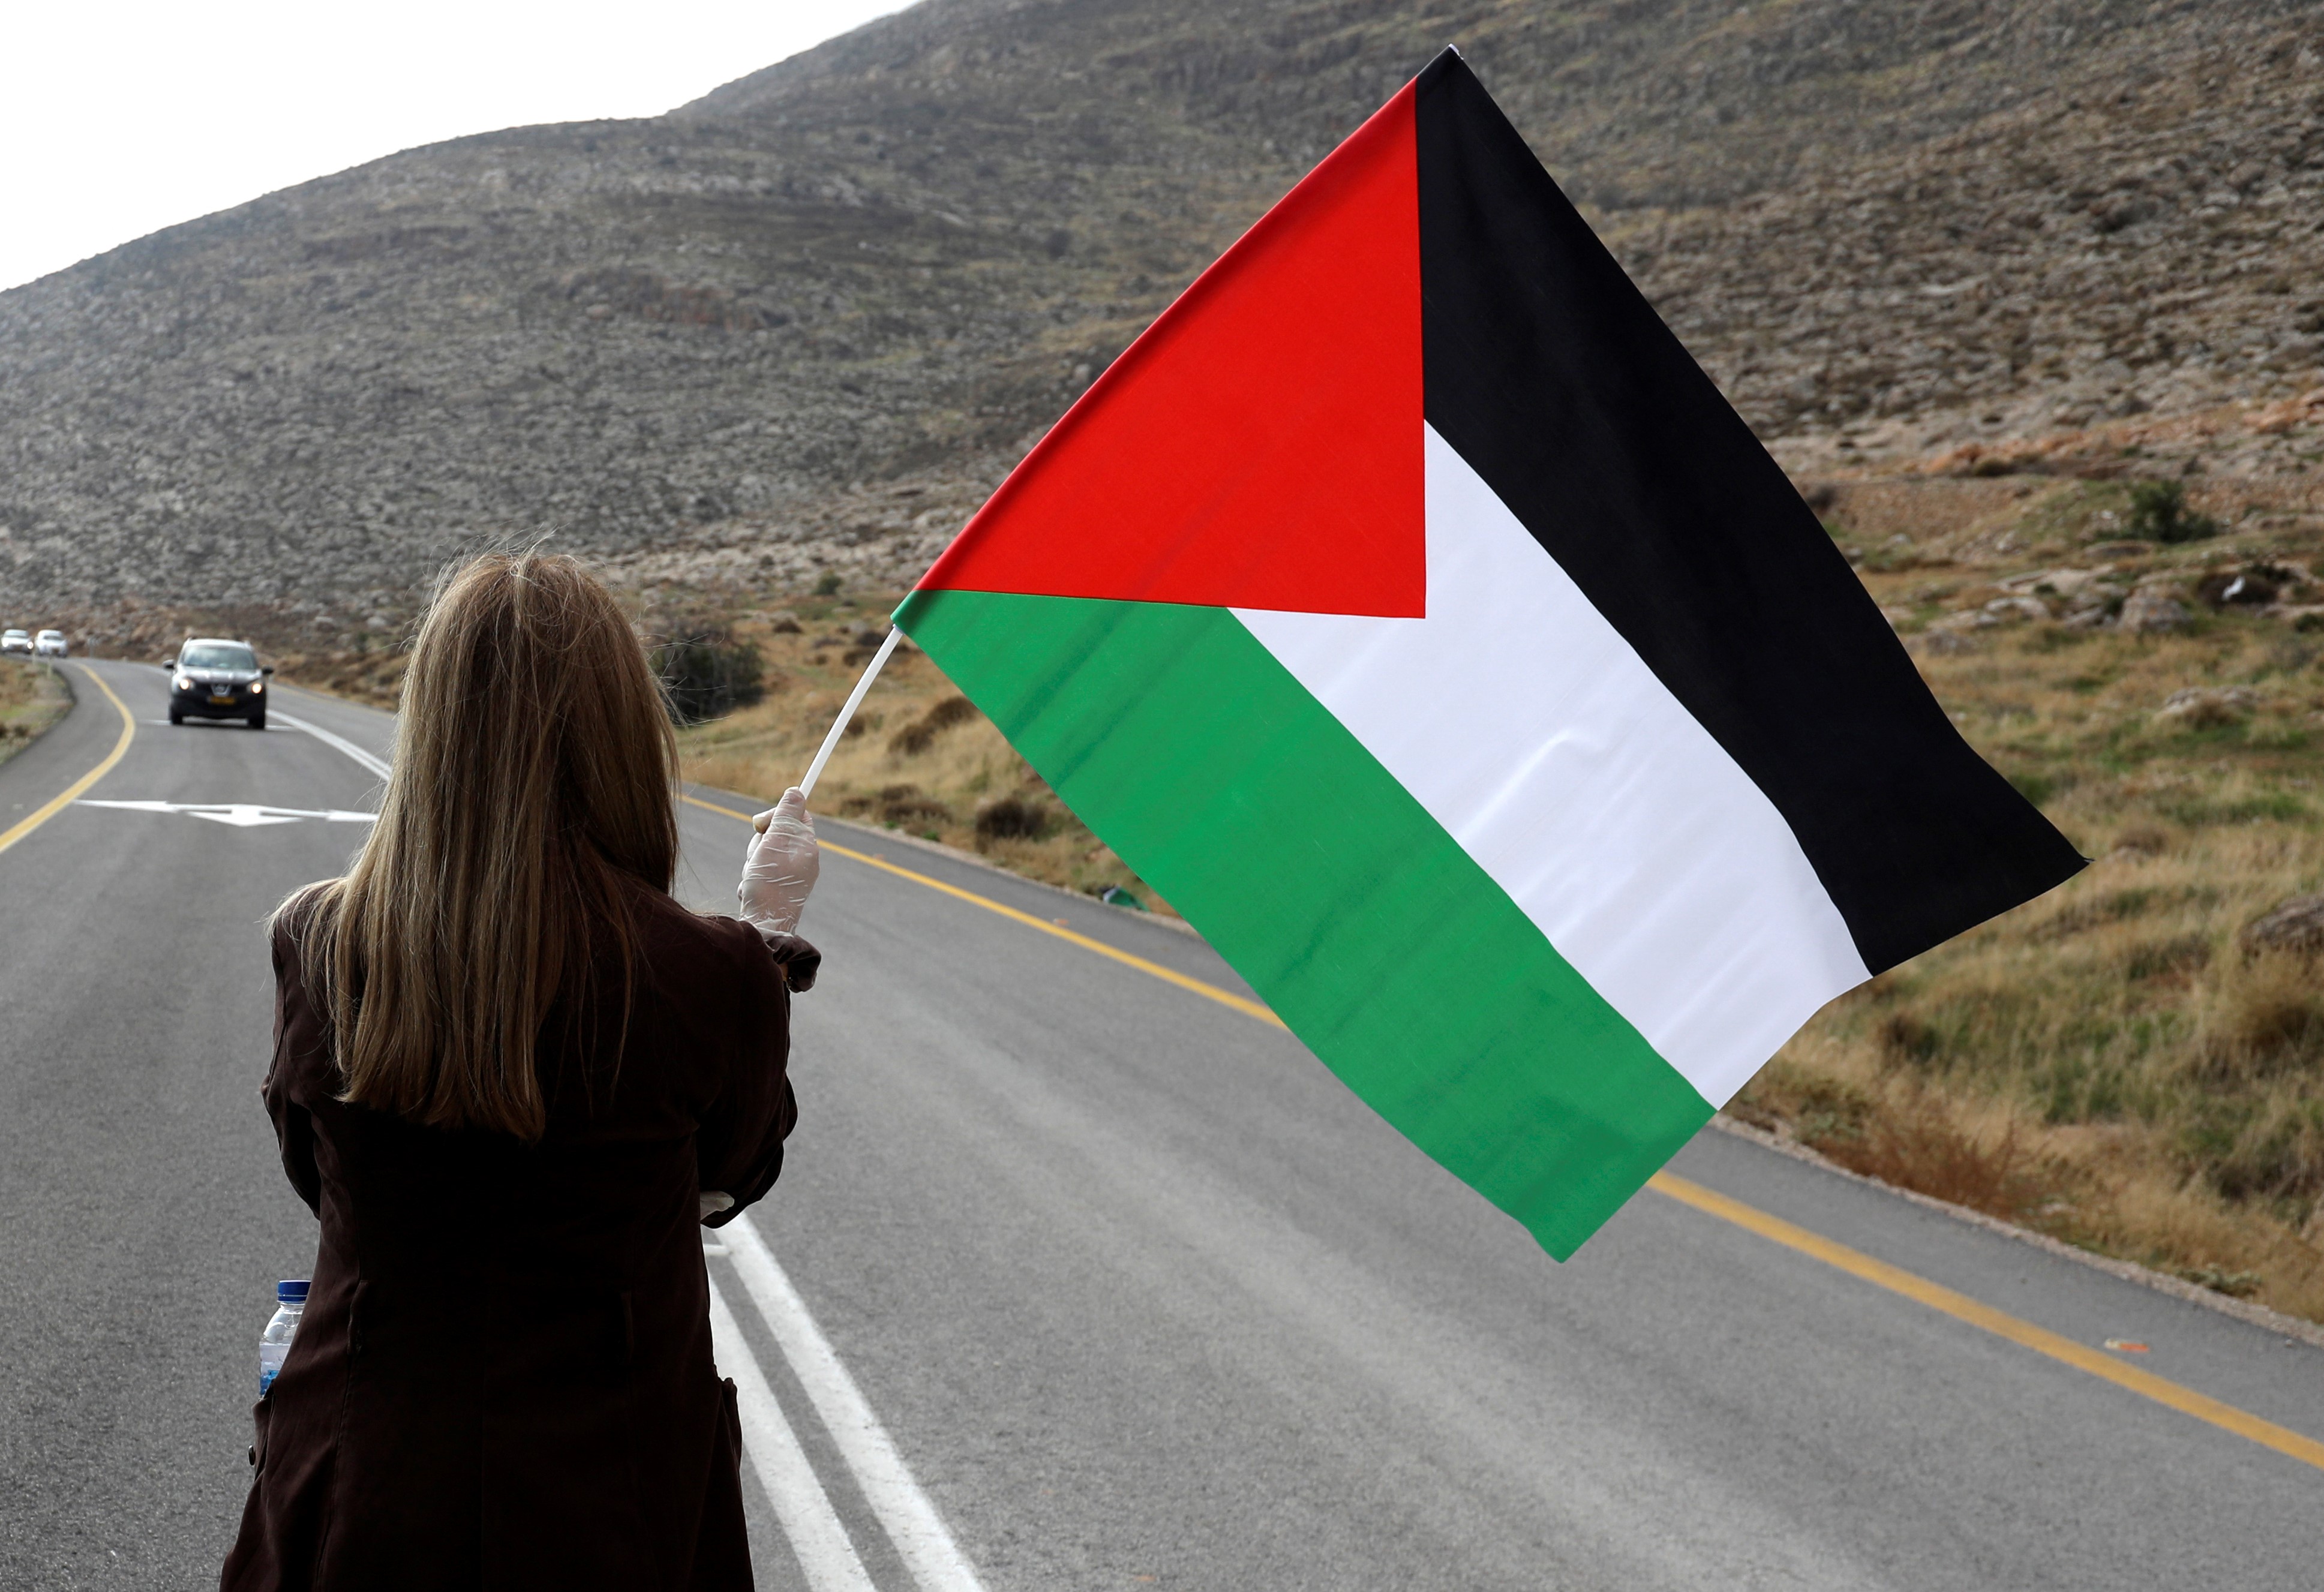 A Palestinian woman stands in middle of a road to stop Israeli settlers from passing during a demonstration against Jewish settlements in the village Kafr Malik in the Israeli-occupied West Bank, on November 20, 2020